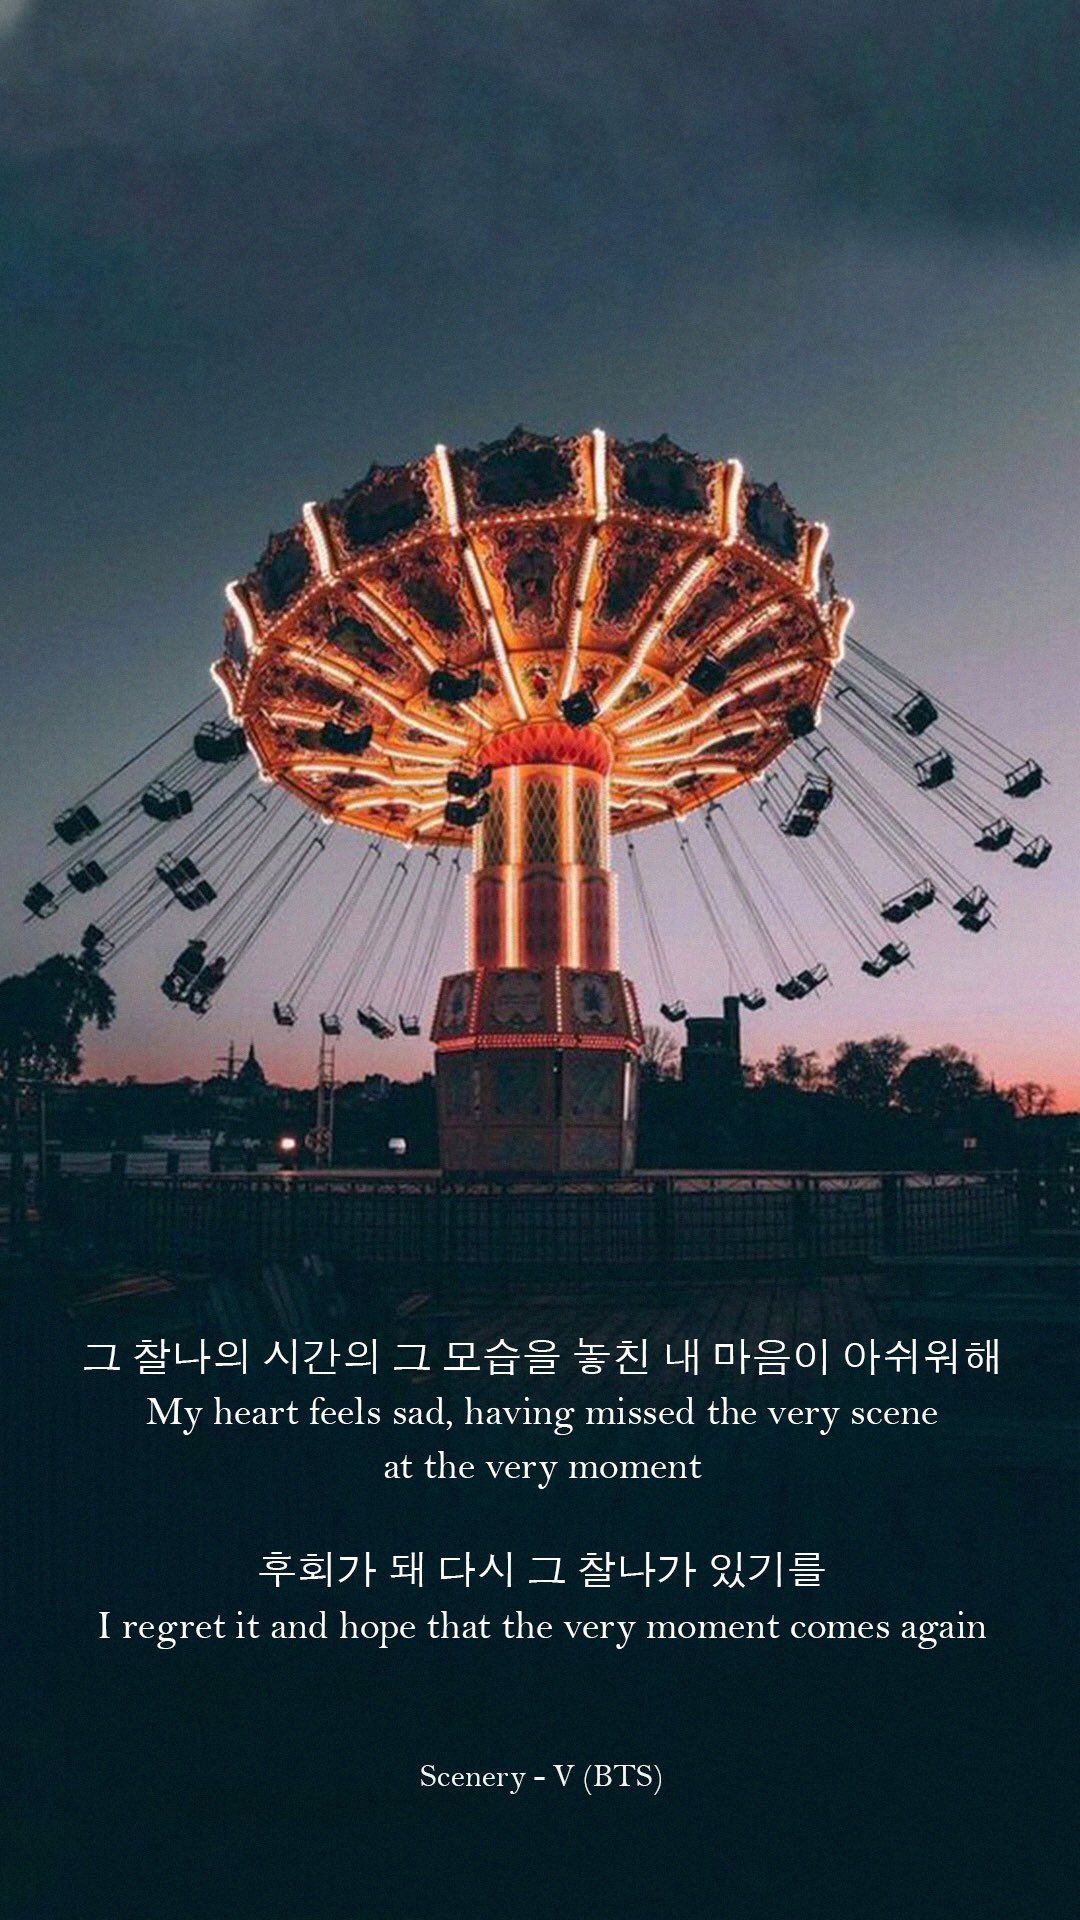 BTS Lyrics ⁷ that the very moment comes again